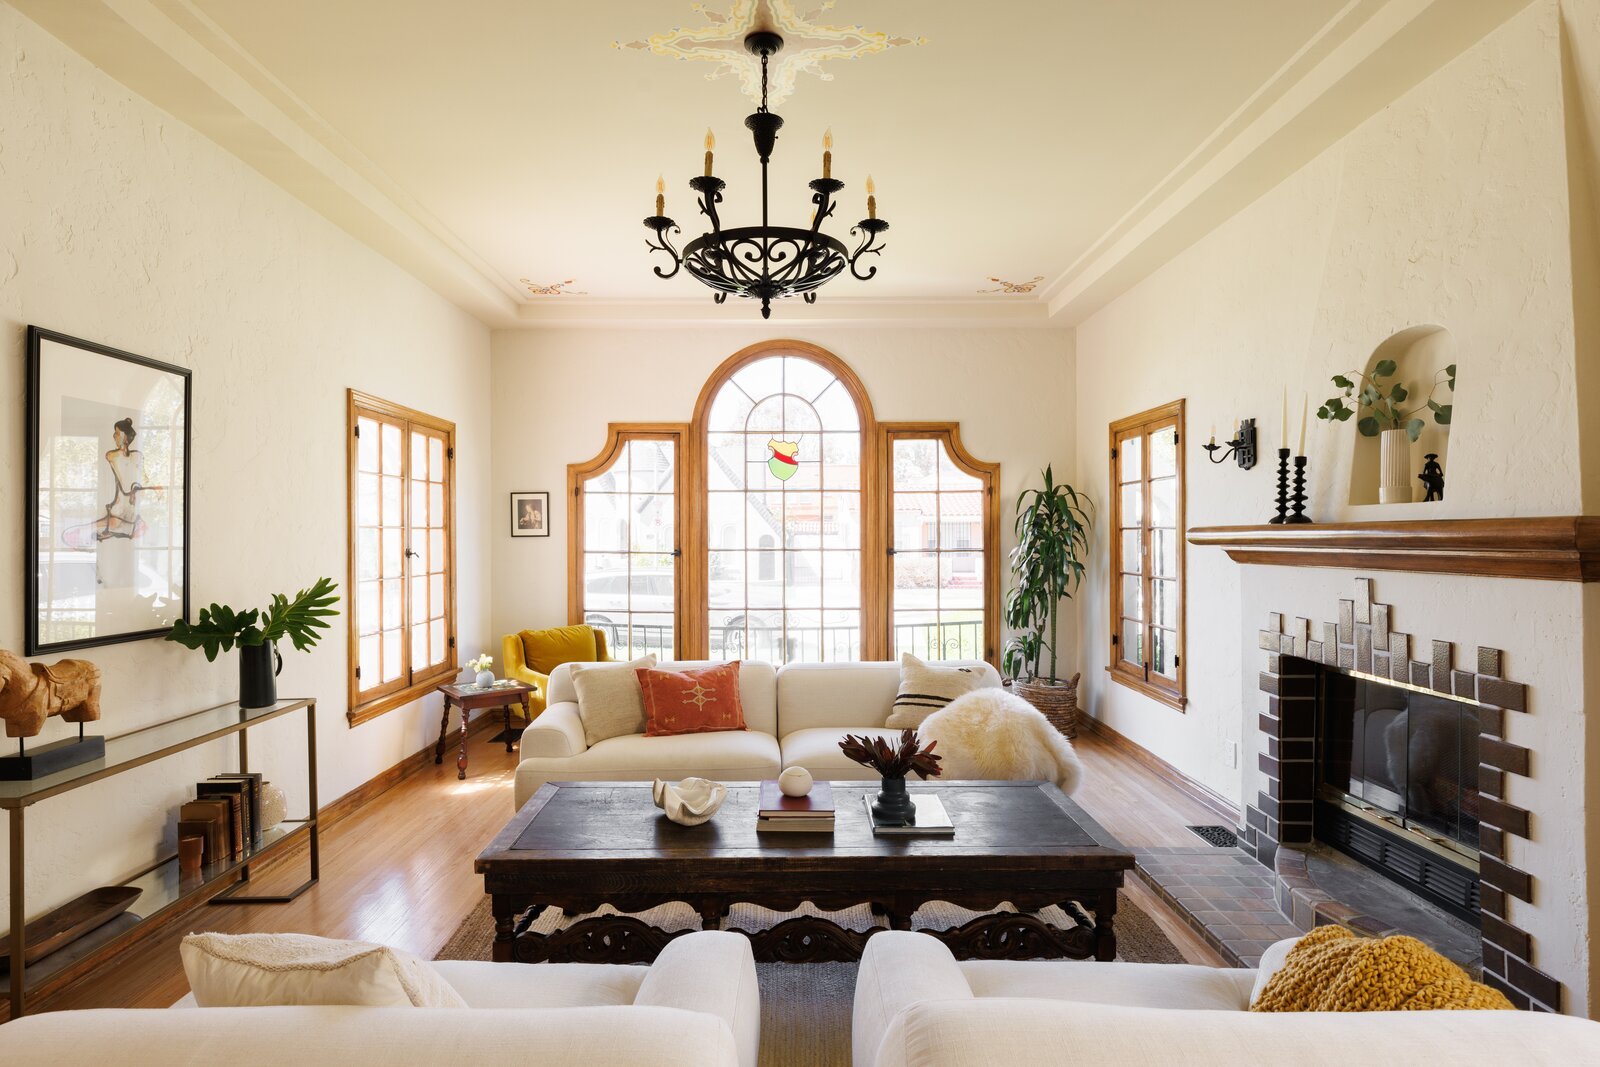 This Restored 1920s L.A. Home Is Packed With Delightful Nooks & Crannies